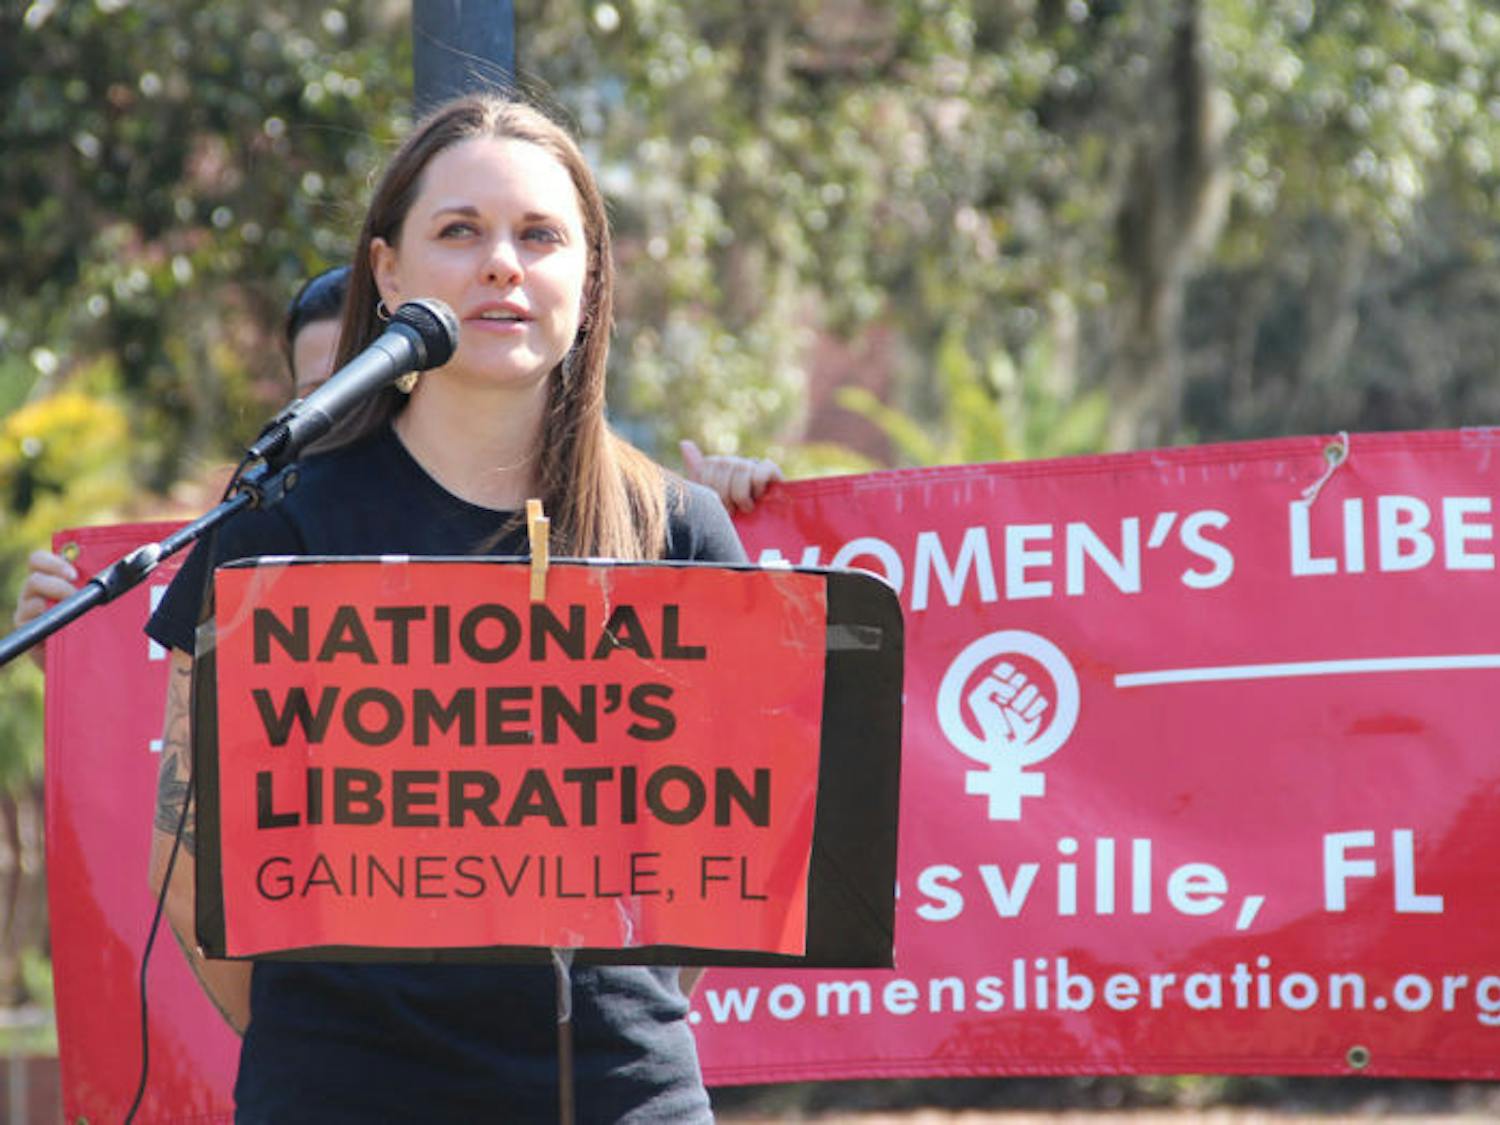 Kendra Vincent, chairwoman of the Gainesville chapter of National Women’s Liberation, advocates for women’s abortion rights. The event was held Monday afternoon on Plaza of the Americas.